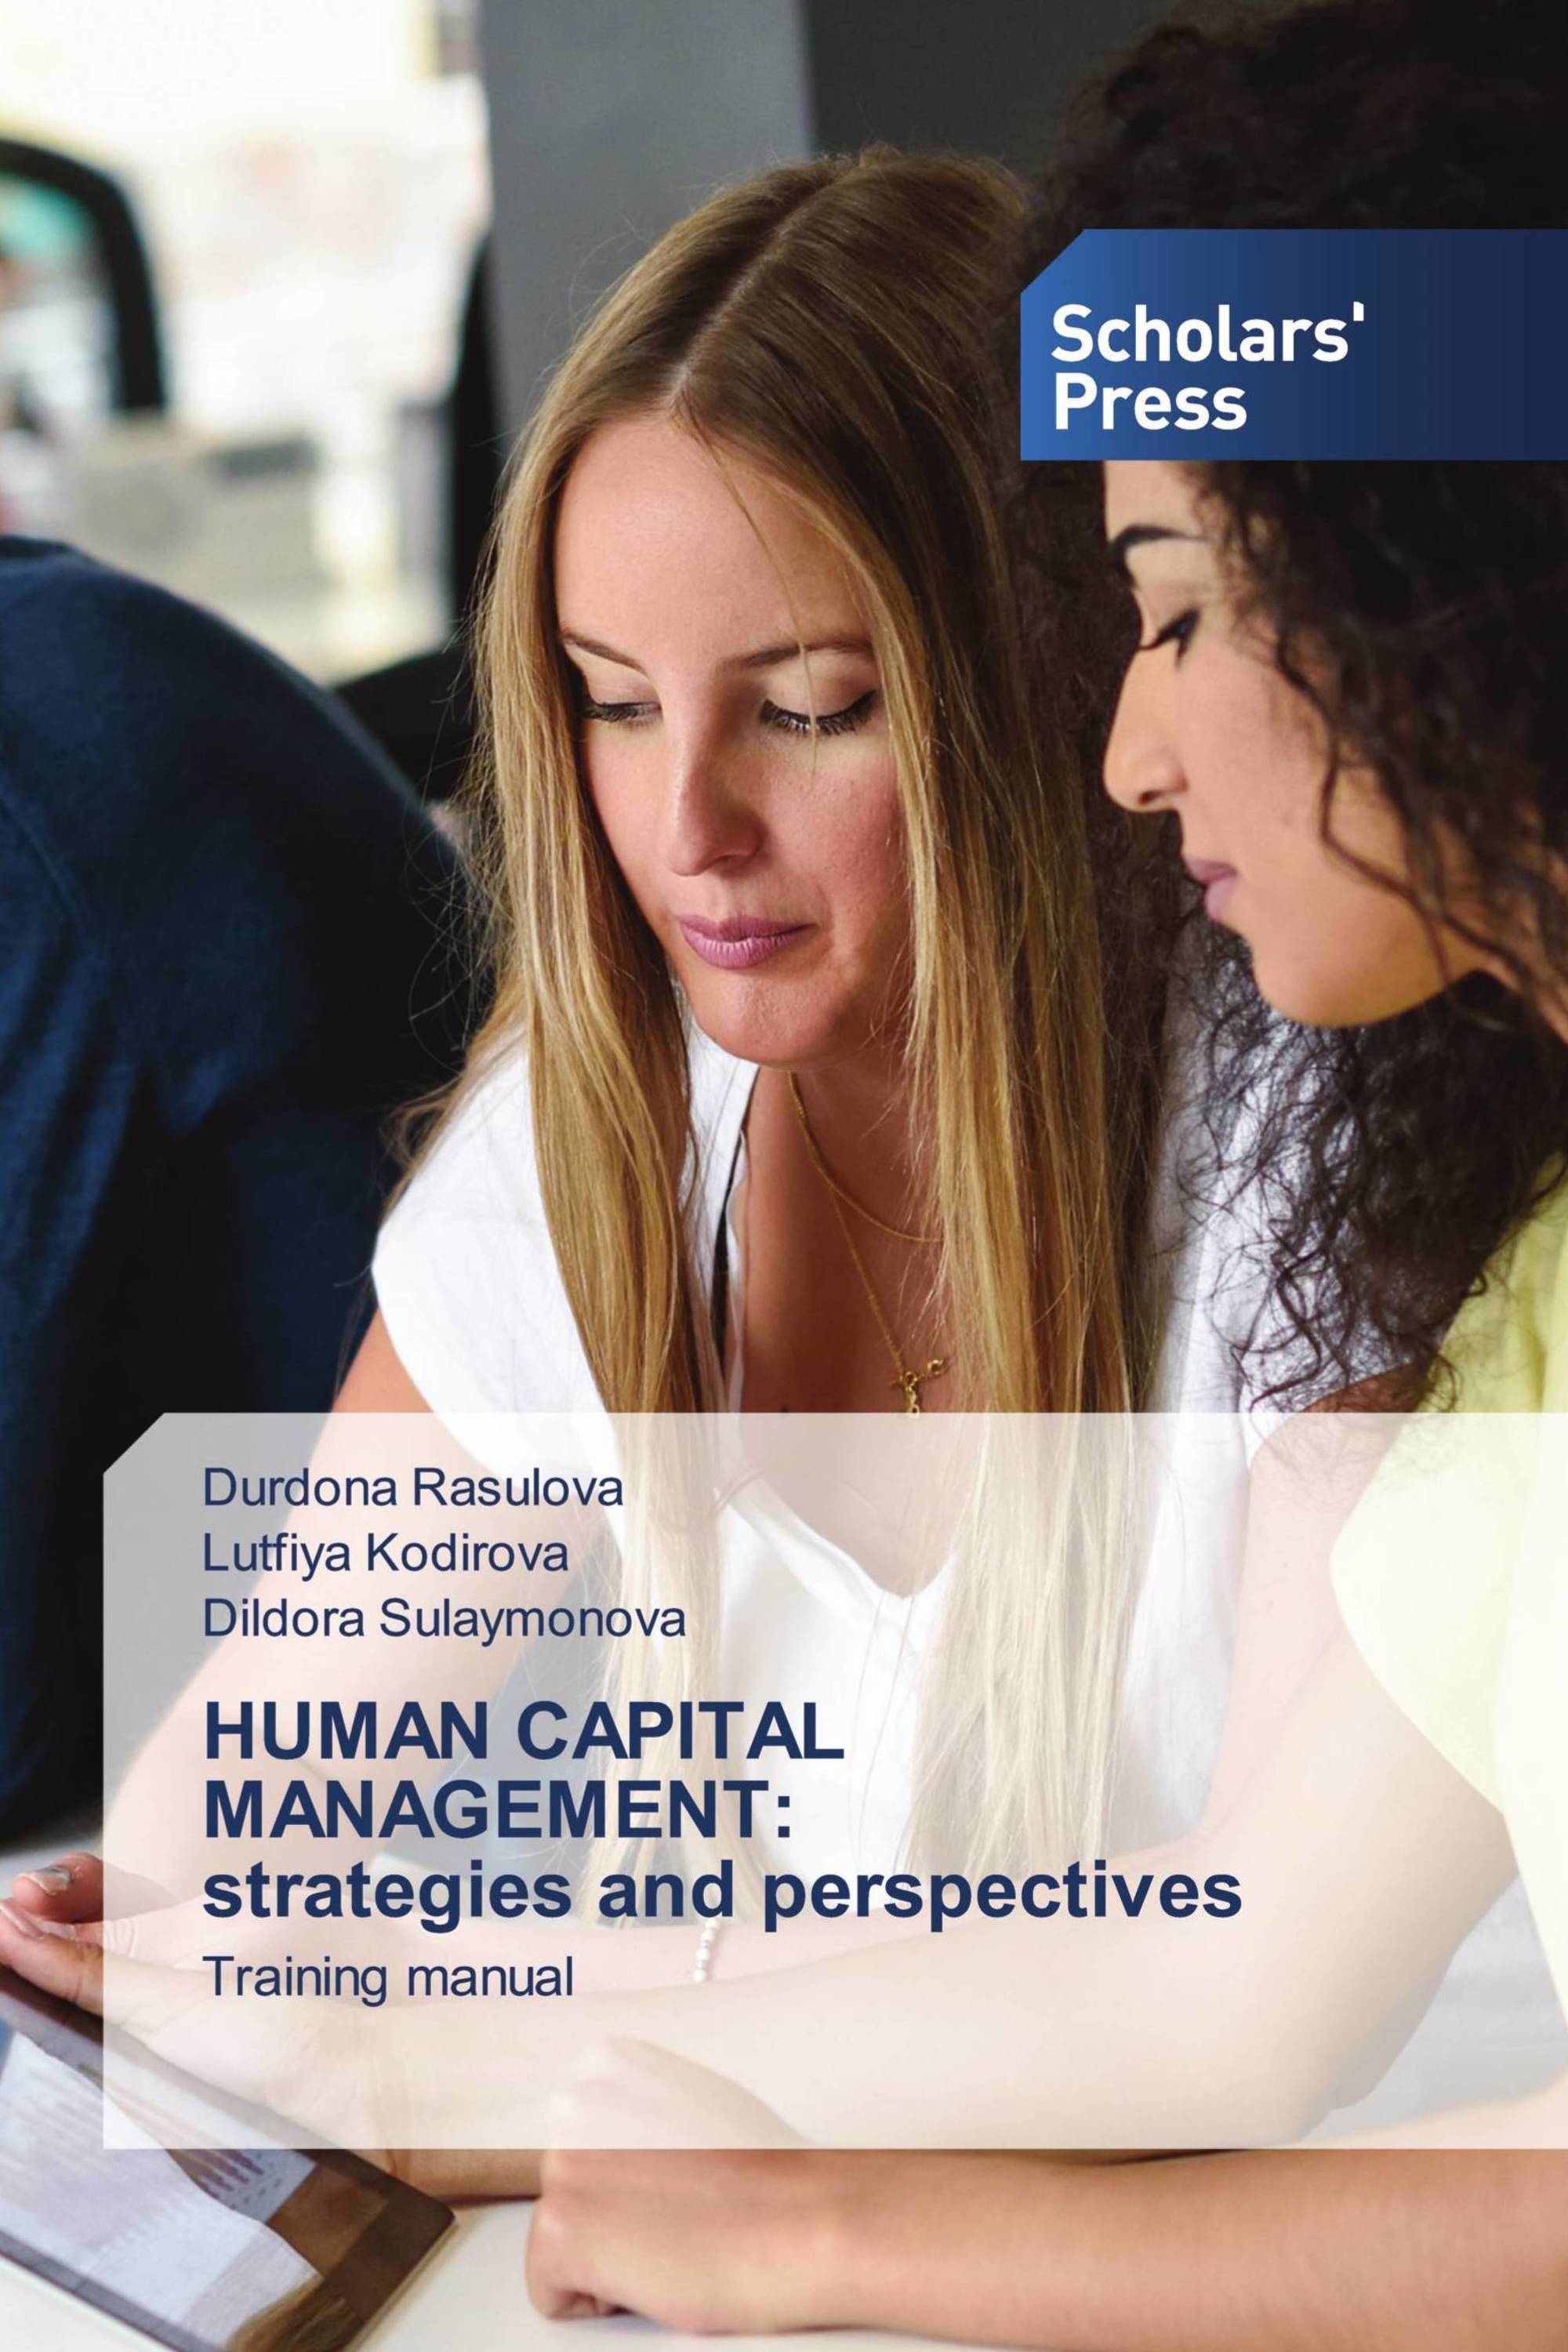 HUMAN CAPITAL MANAGEMENT: strategies and perspectives